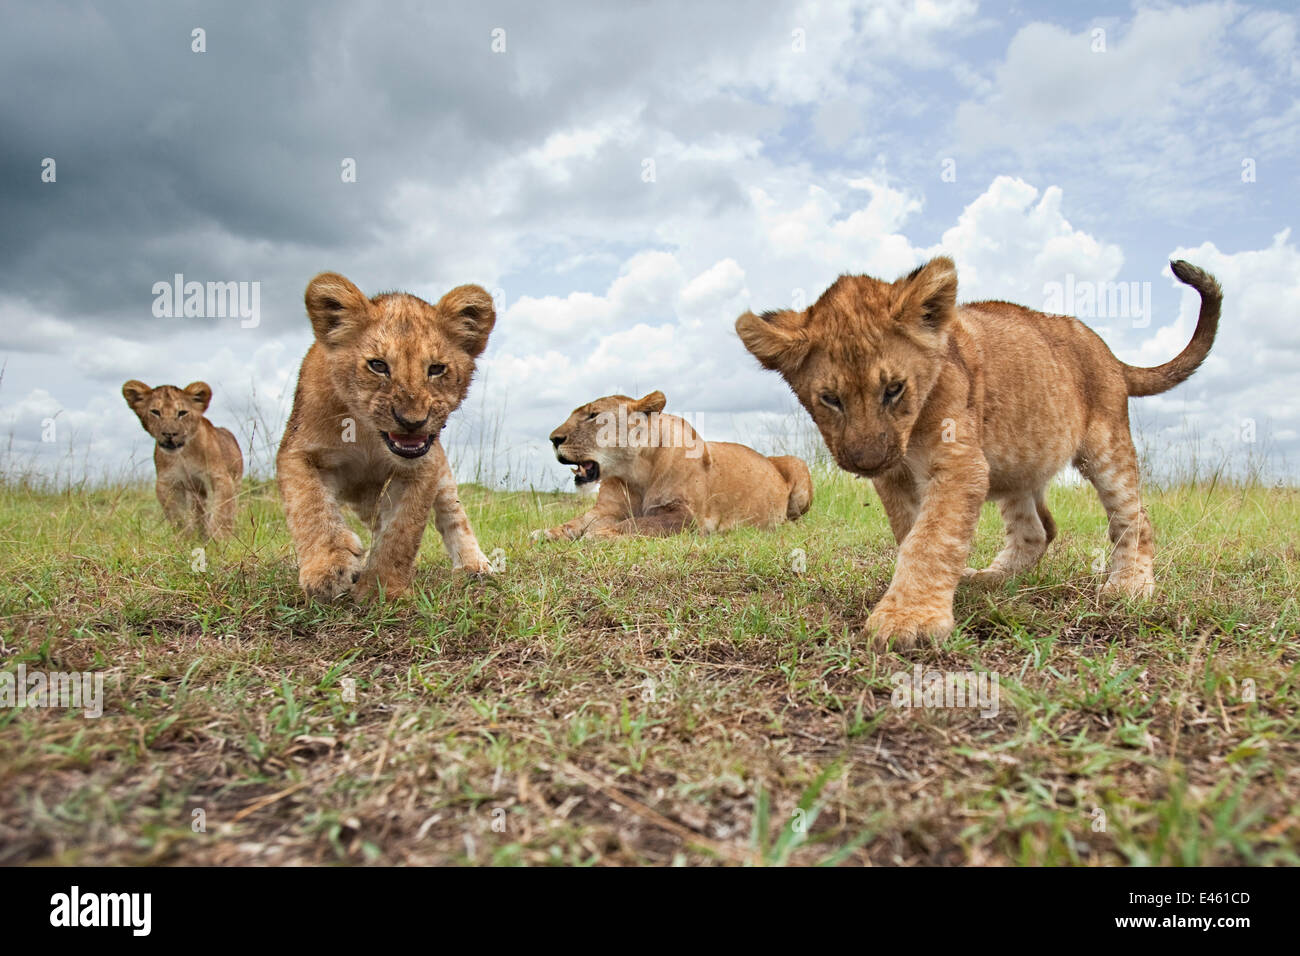 African lion (Panthera leo) cubs aged 6-9 months approaching with curiosity watched by their mother, Masai Mara National Reserve, Kenya. February Stock Photo